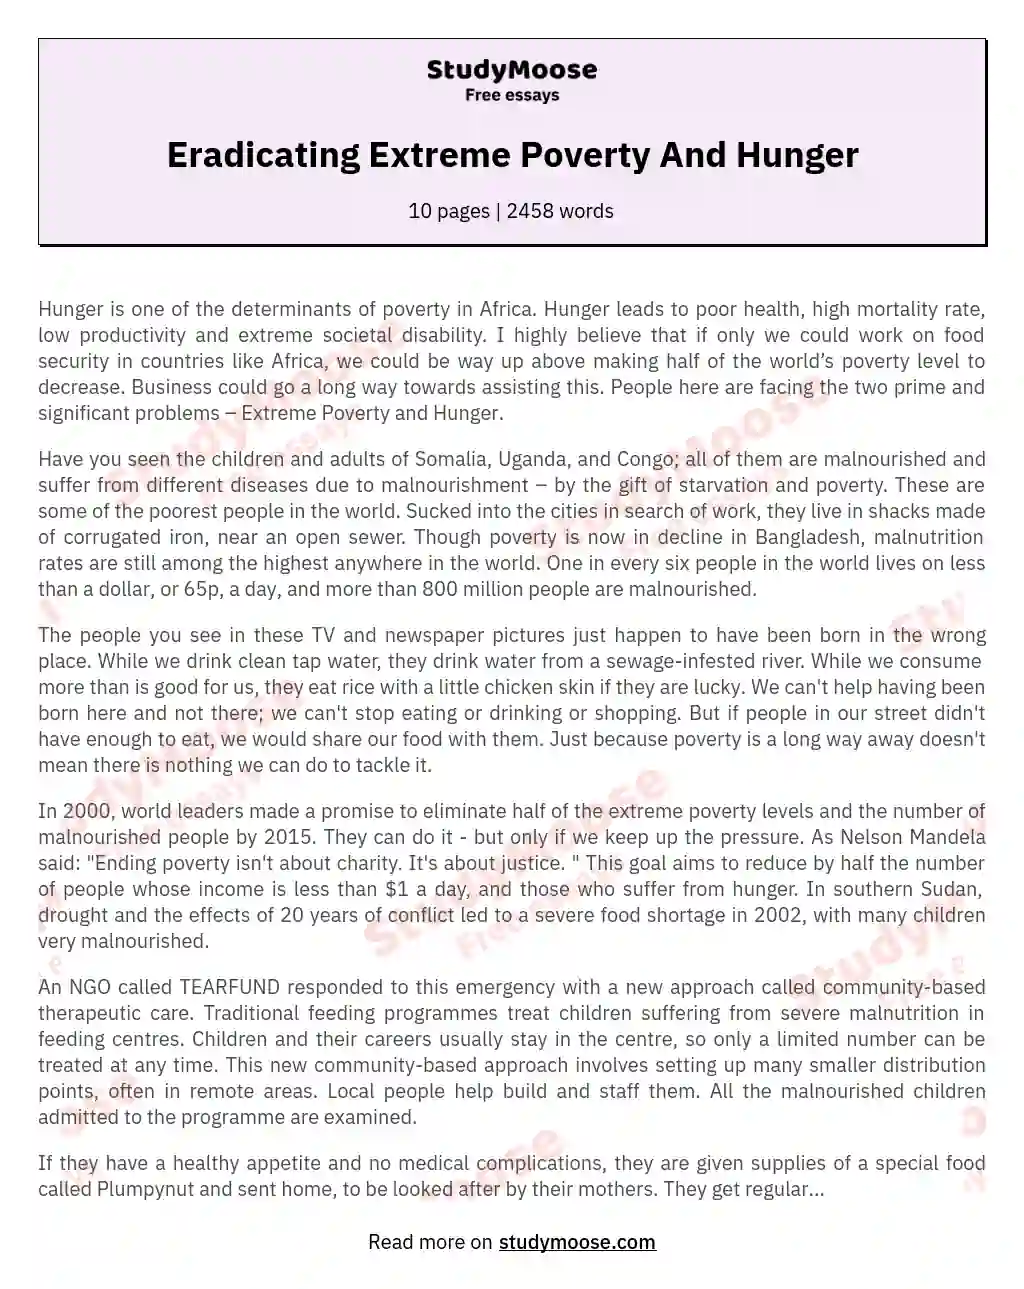 Eradicating Extreme Poverty And Hunger essay